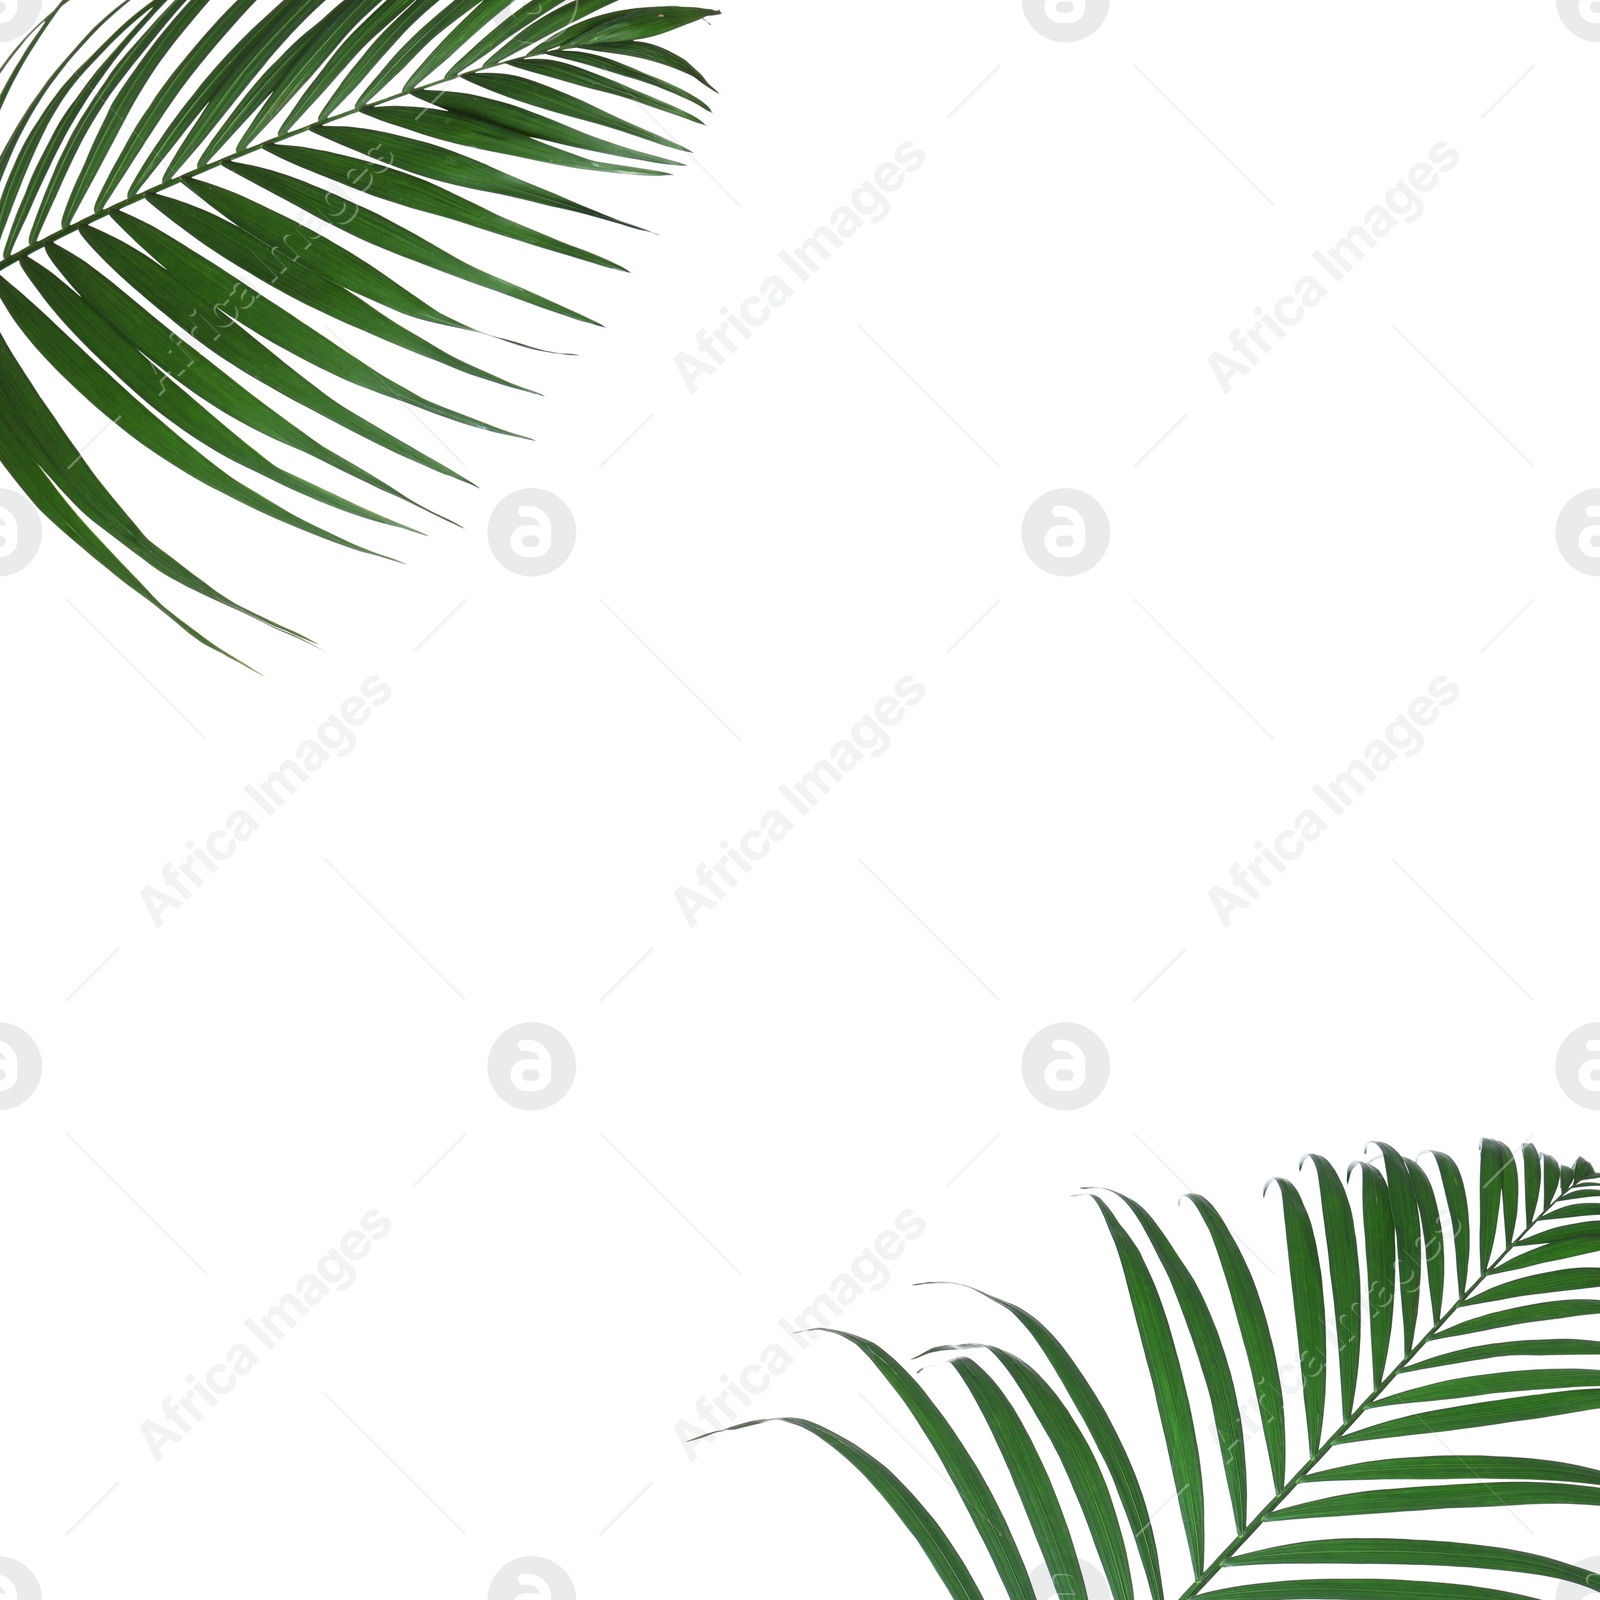 Image of Frame made of beautiful lush tropical leaves on white background